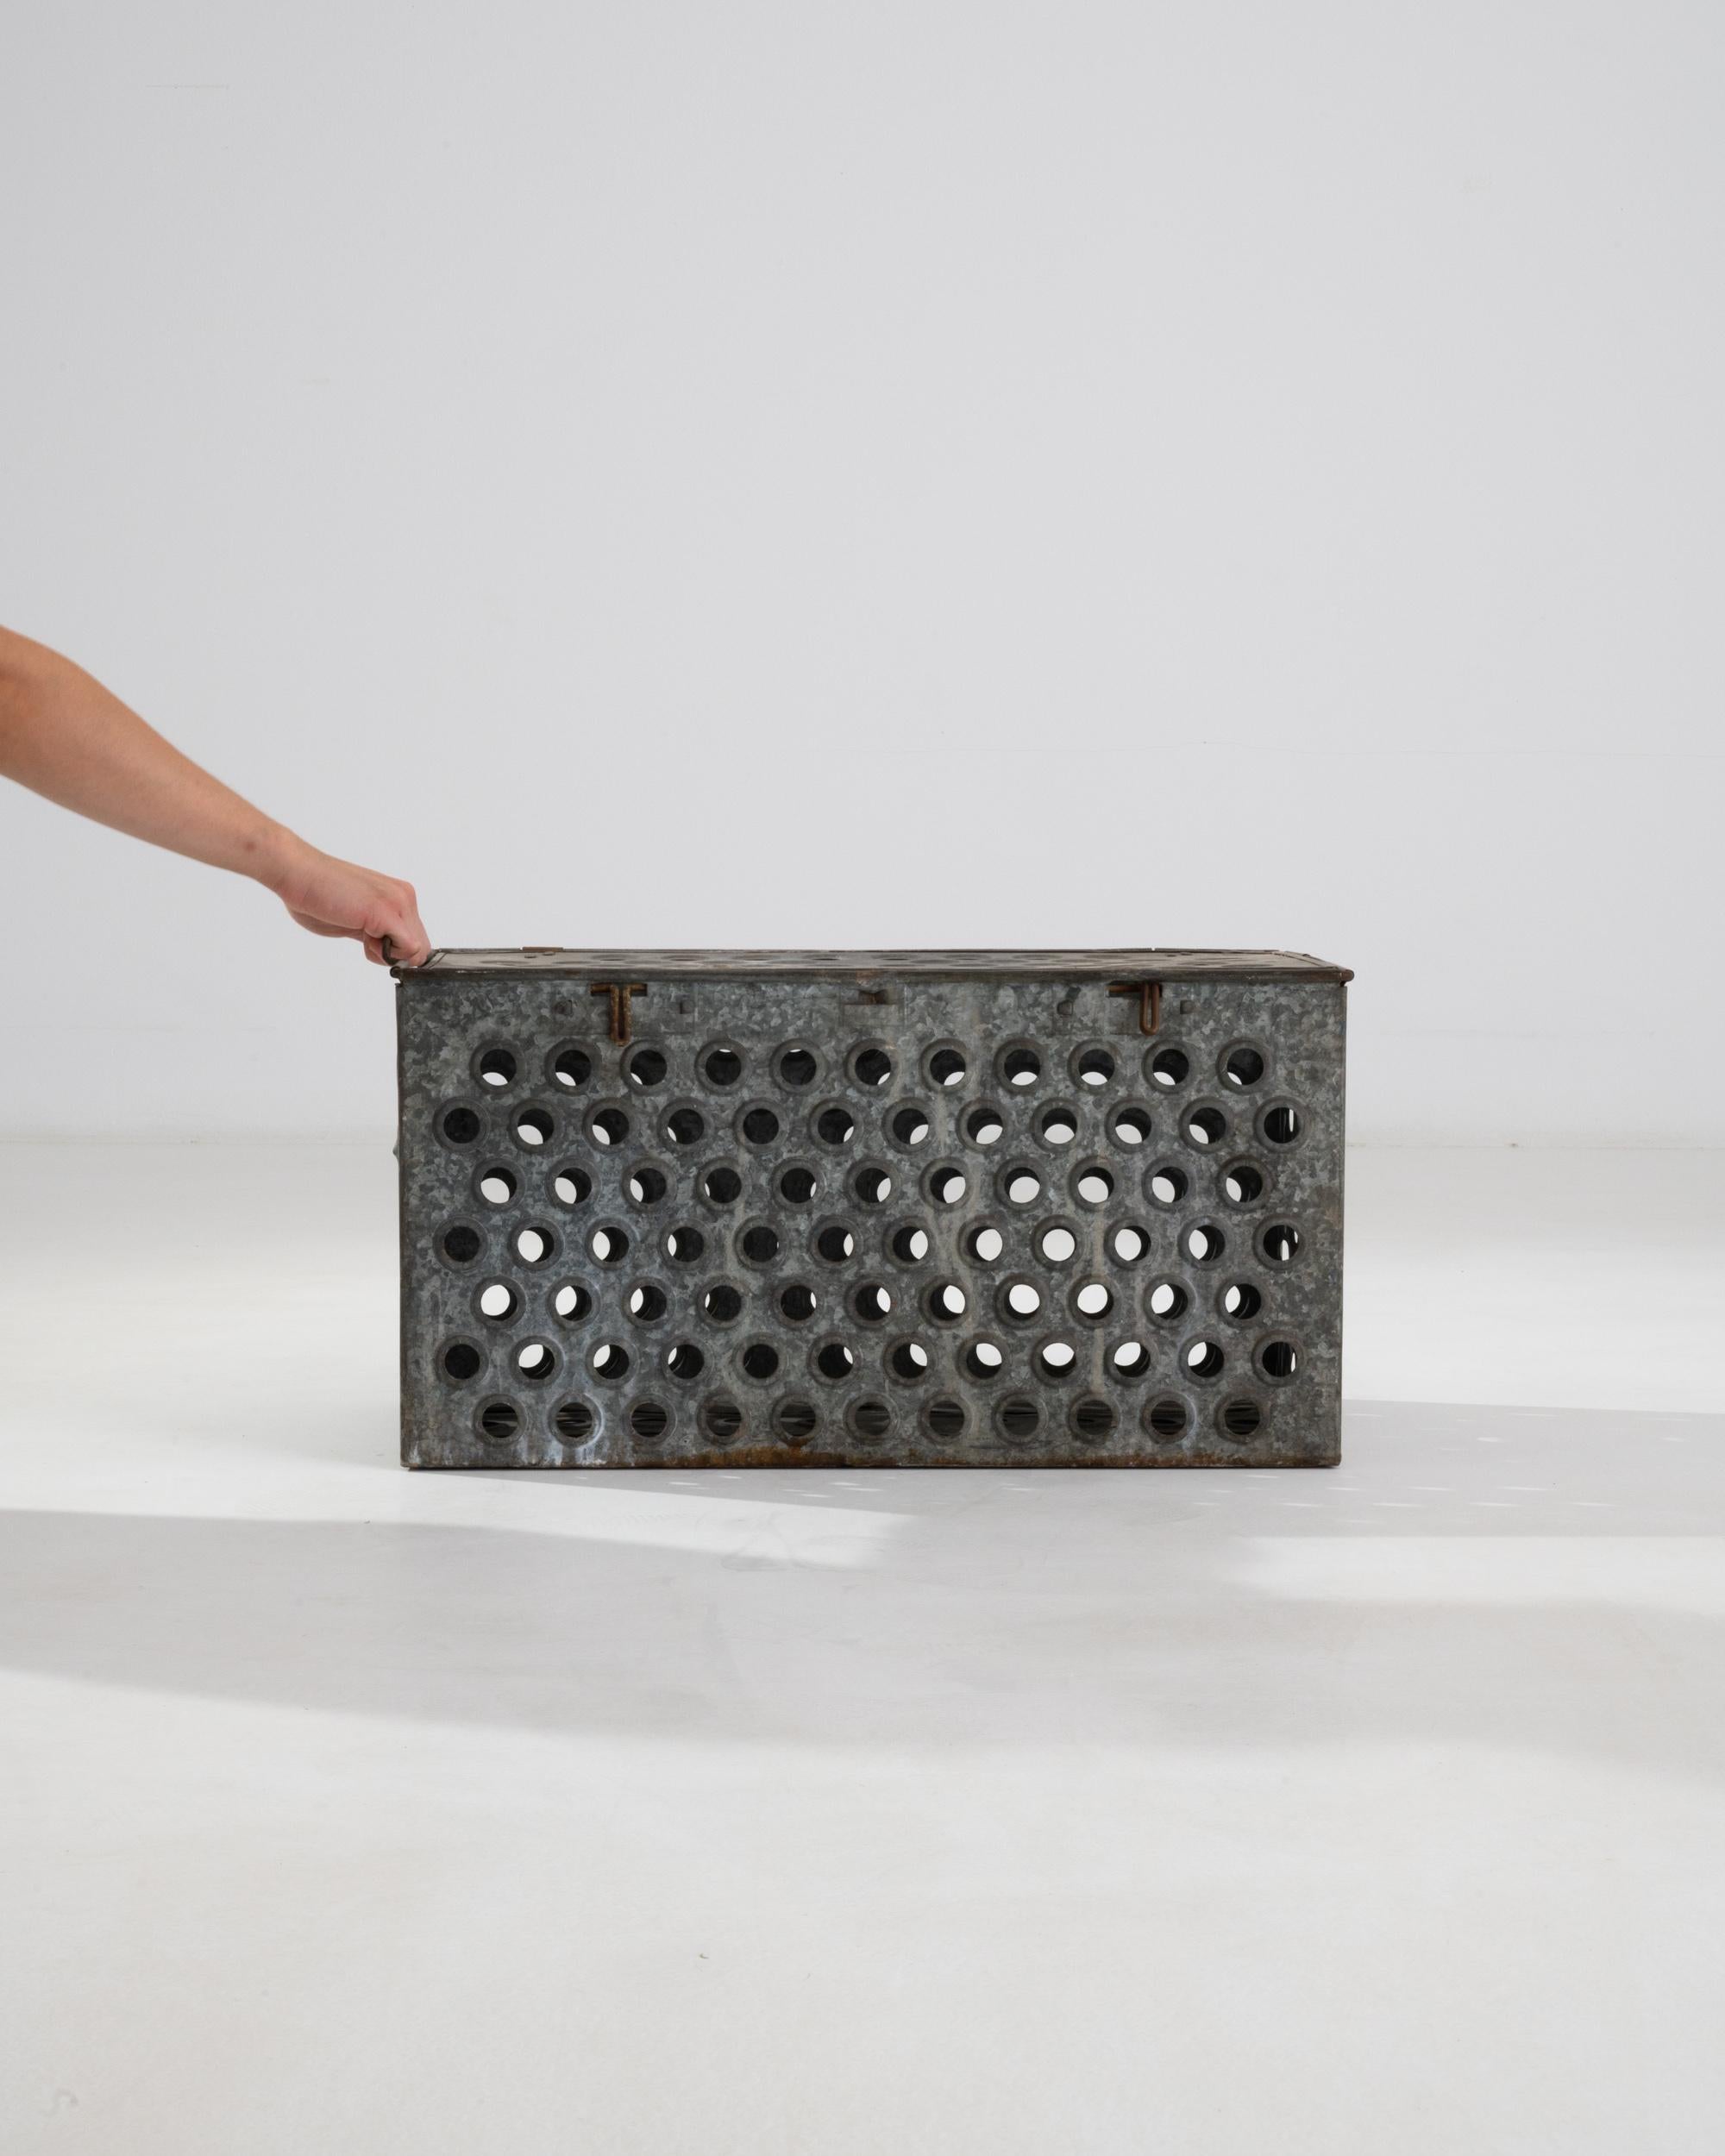 This 20th Century Central European zinc box is a remarkable piece, showcasing utilitarian design and industrial aesthetics. The box’s durable zinc construction ensures longevity, while the distinctive patina it has acquired over the years adds depth